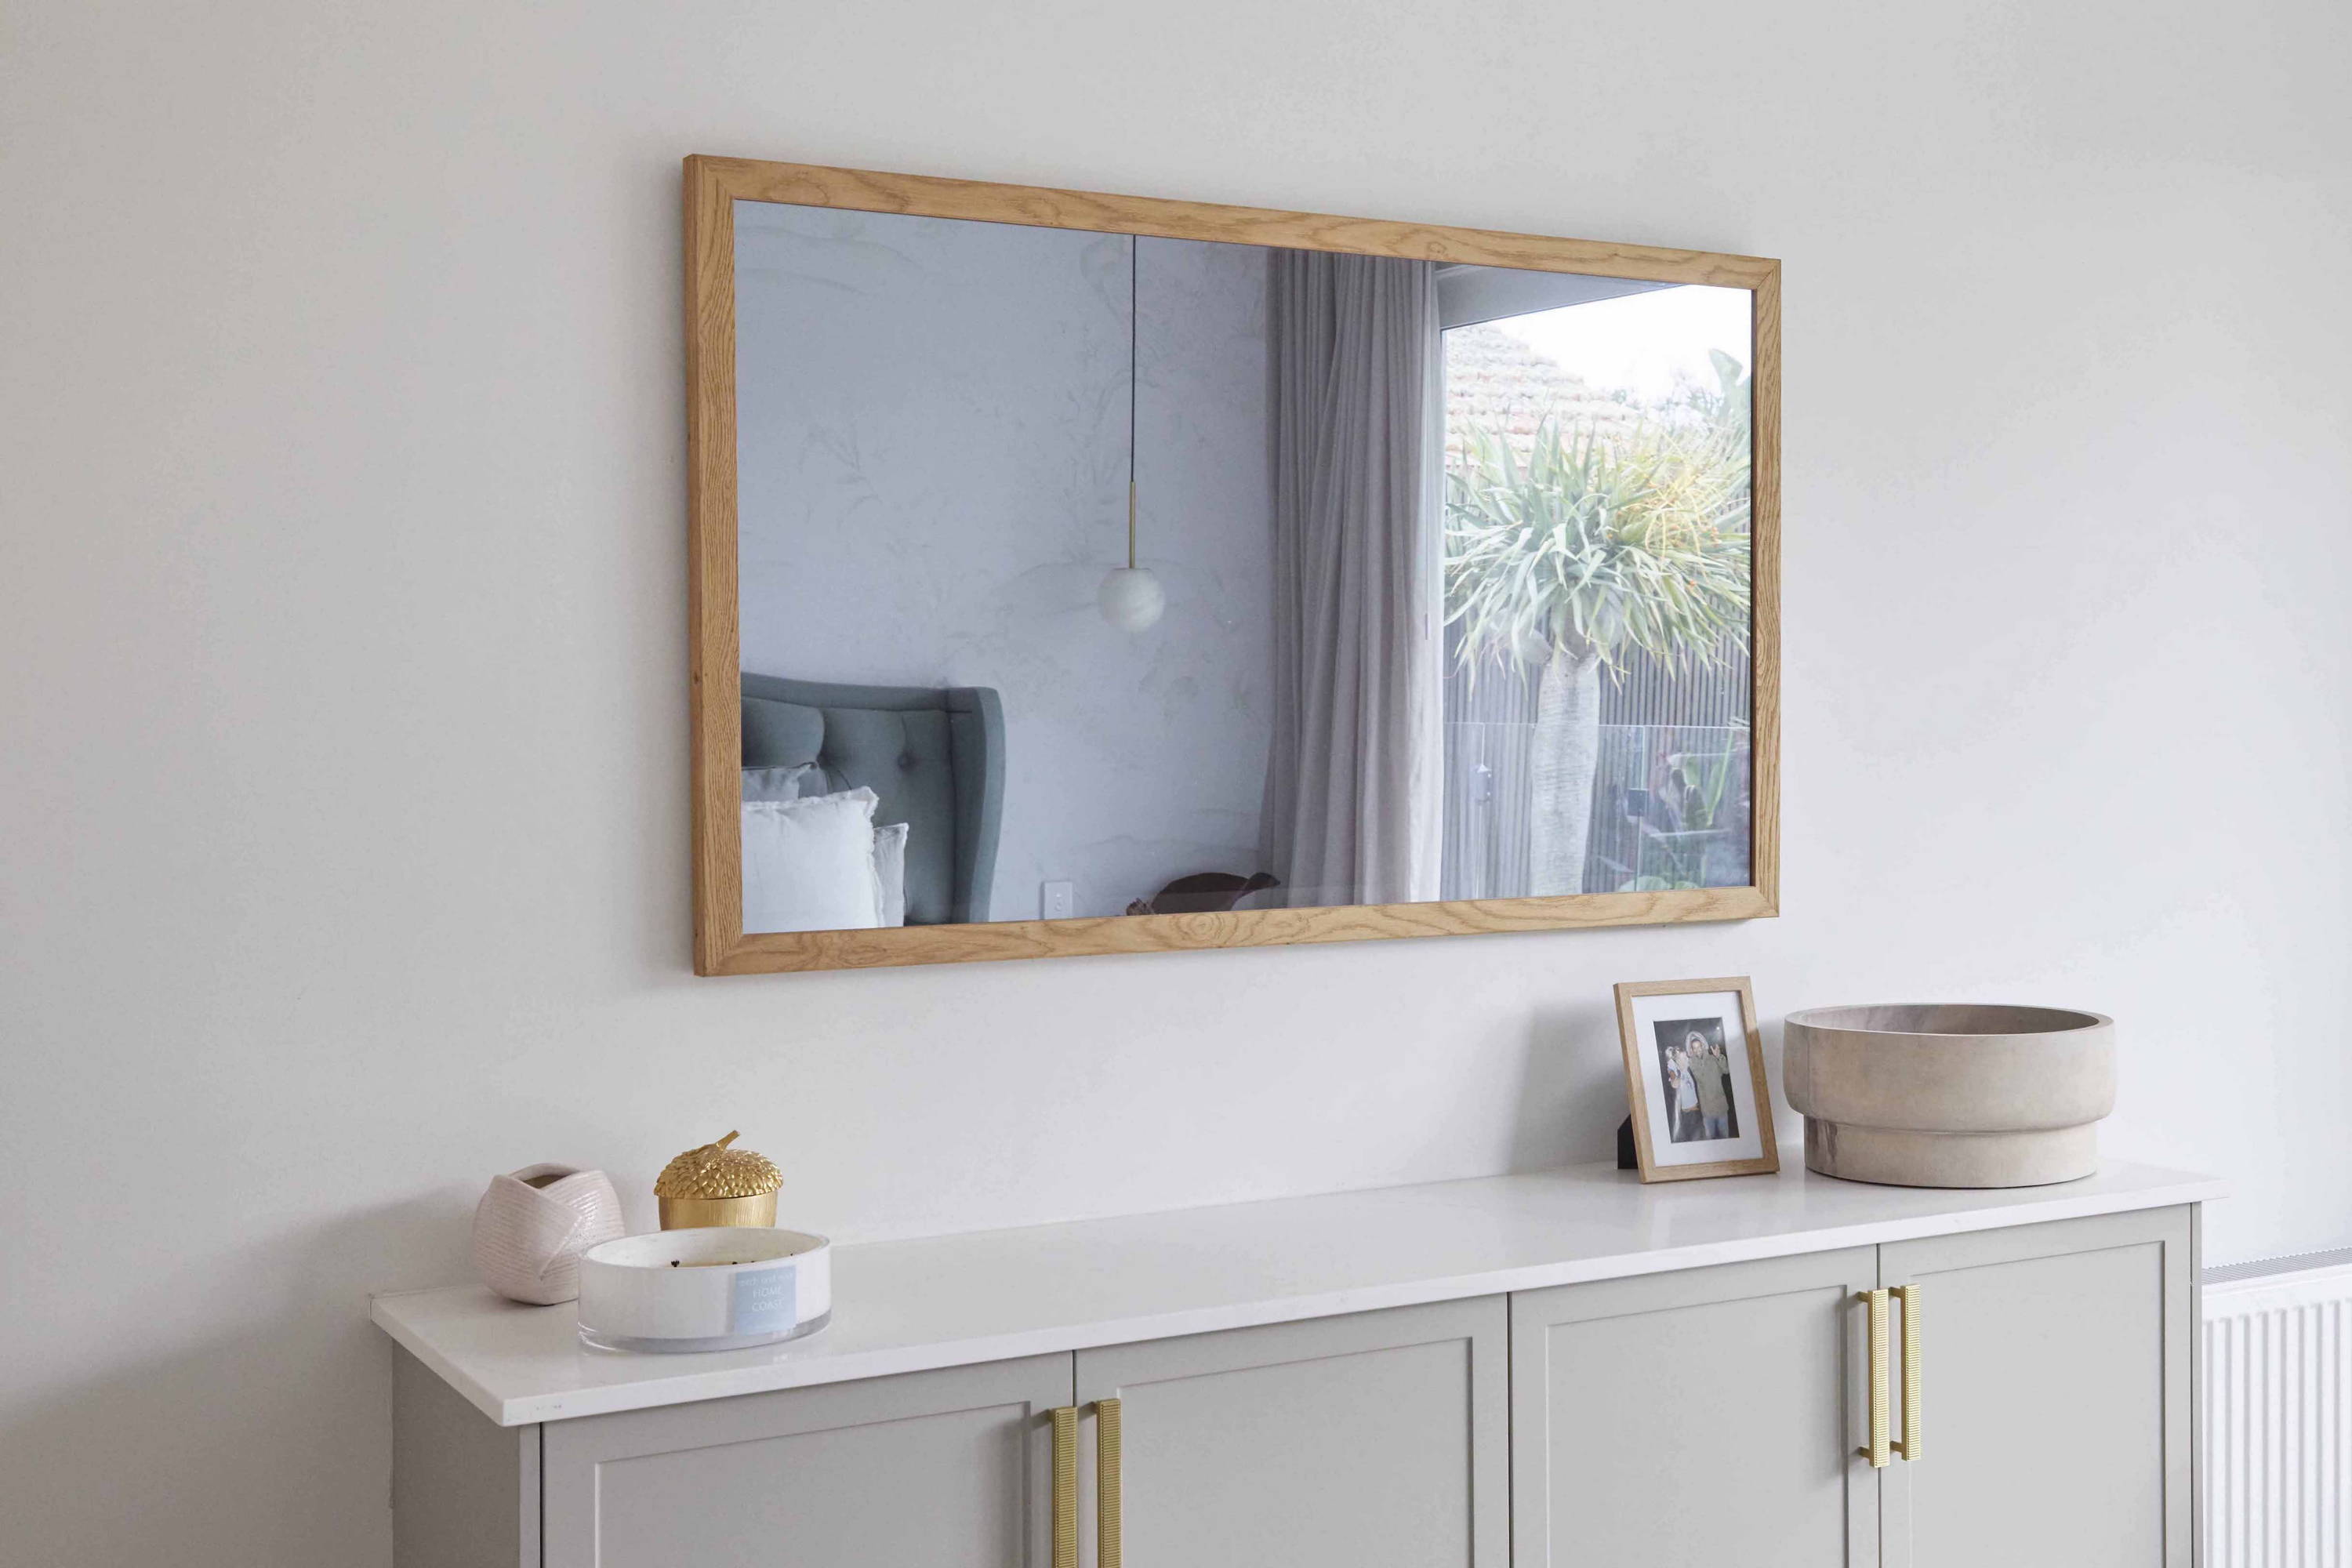 TV-Mirror Modern Rustic Oak Frame by FRAMING TO A T - A TV-Mirror with an oak frame in a light, fresh bedroom.